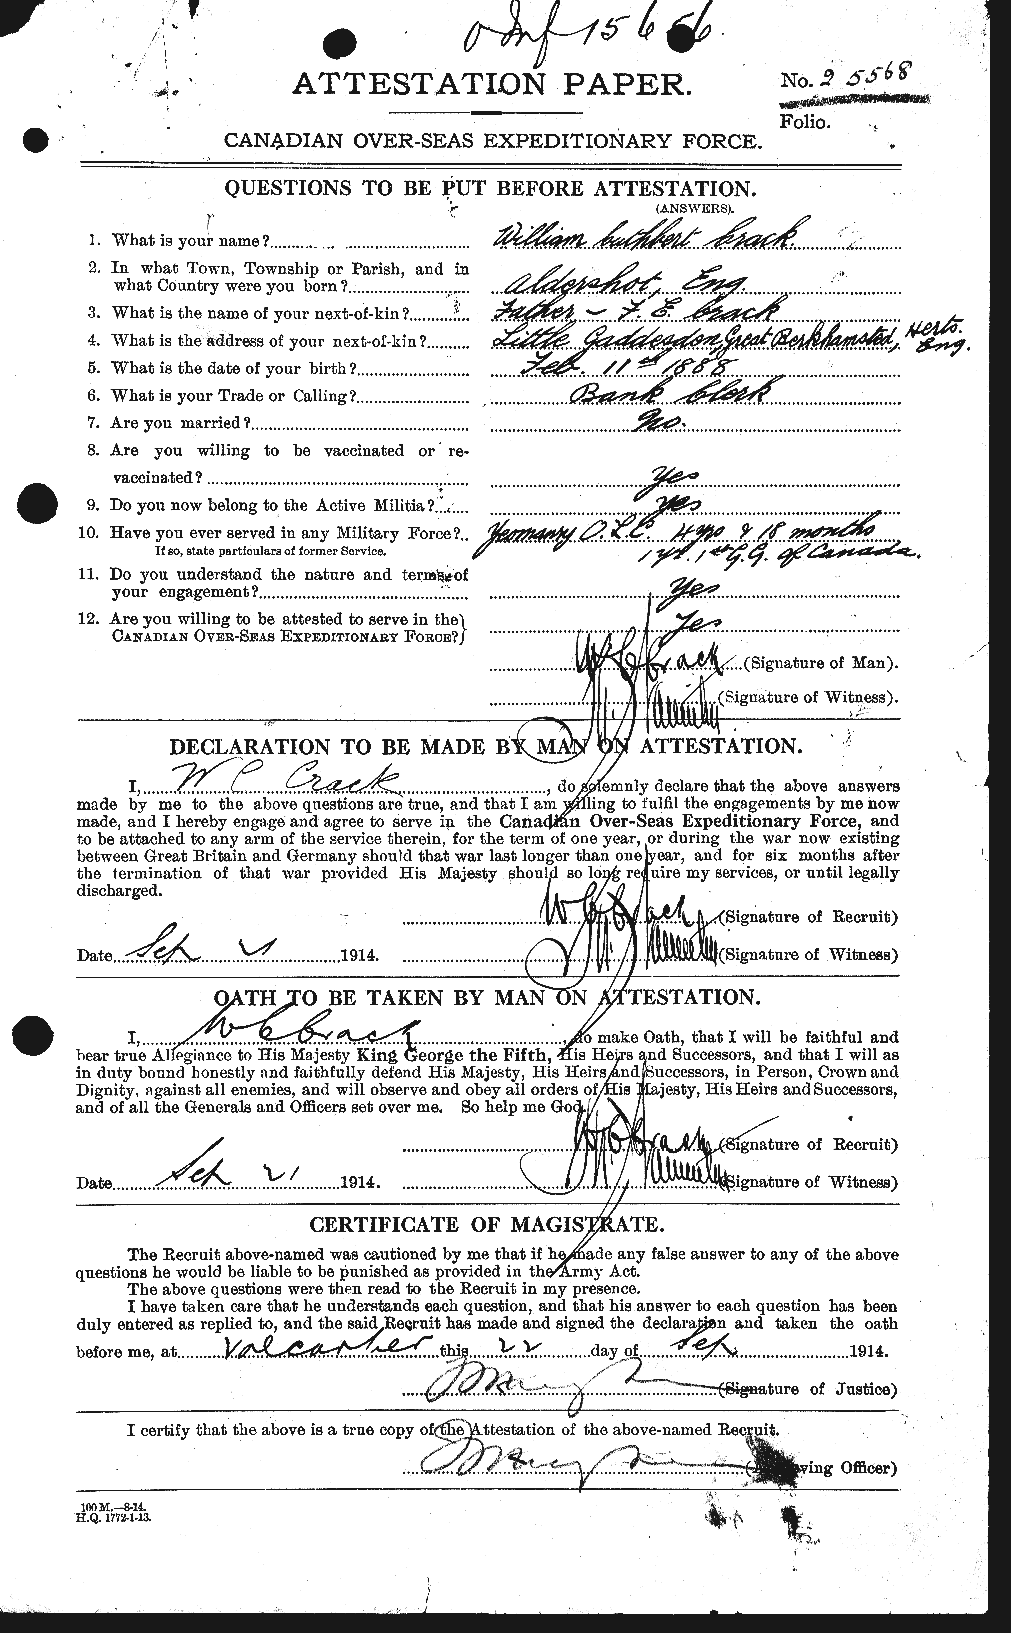 Personnel Records of the First World War - CEF 063293a